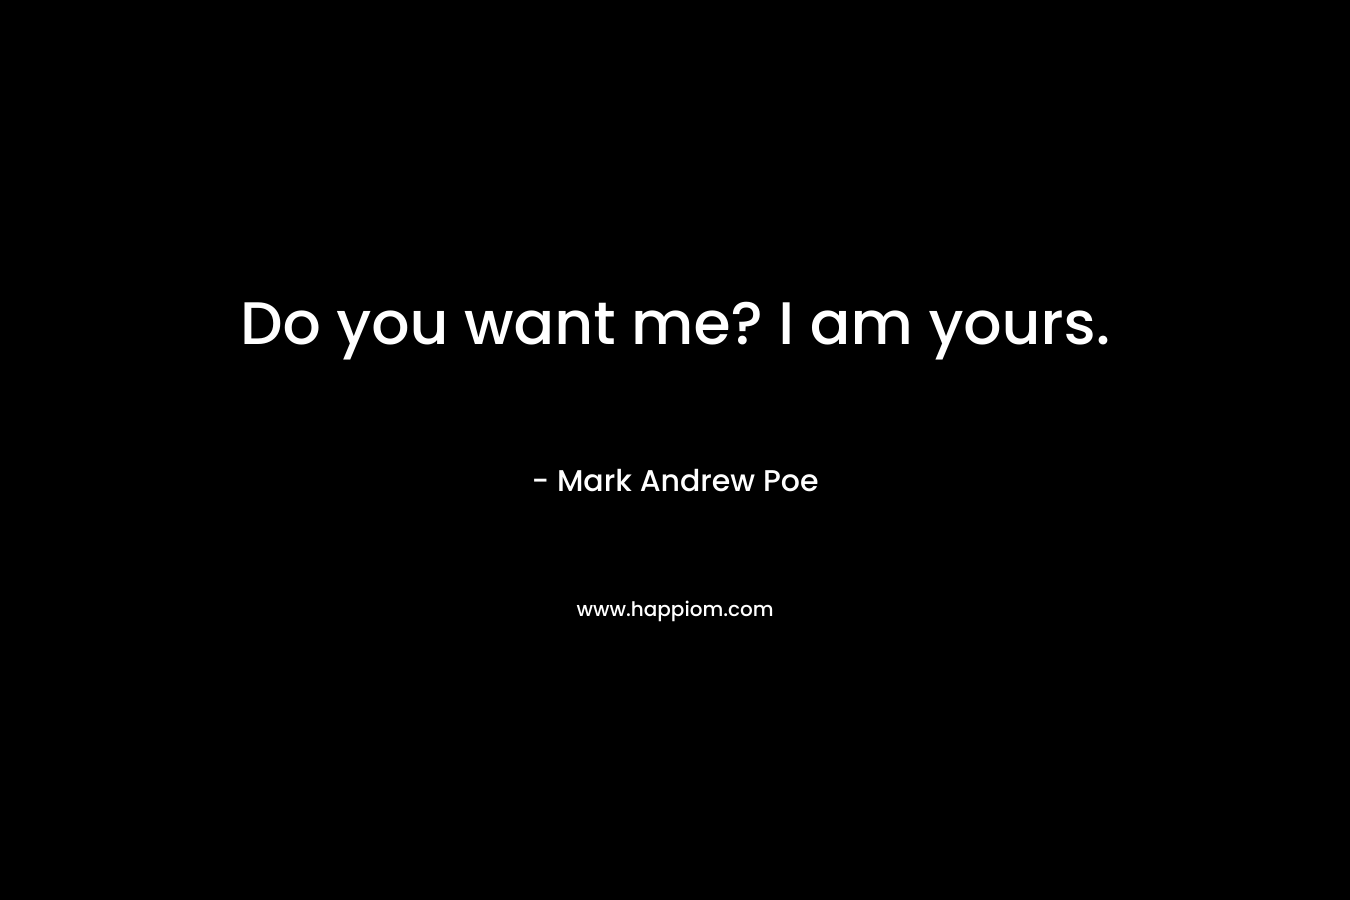 Do you want me? I am yours.